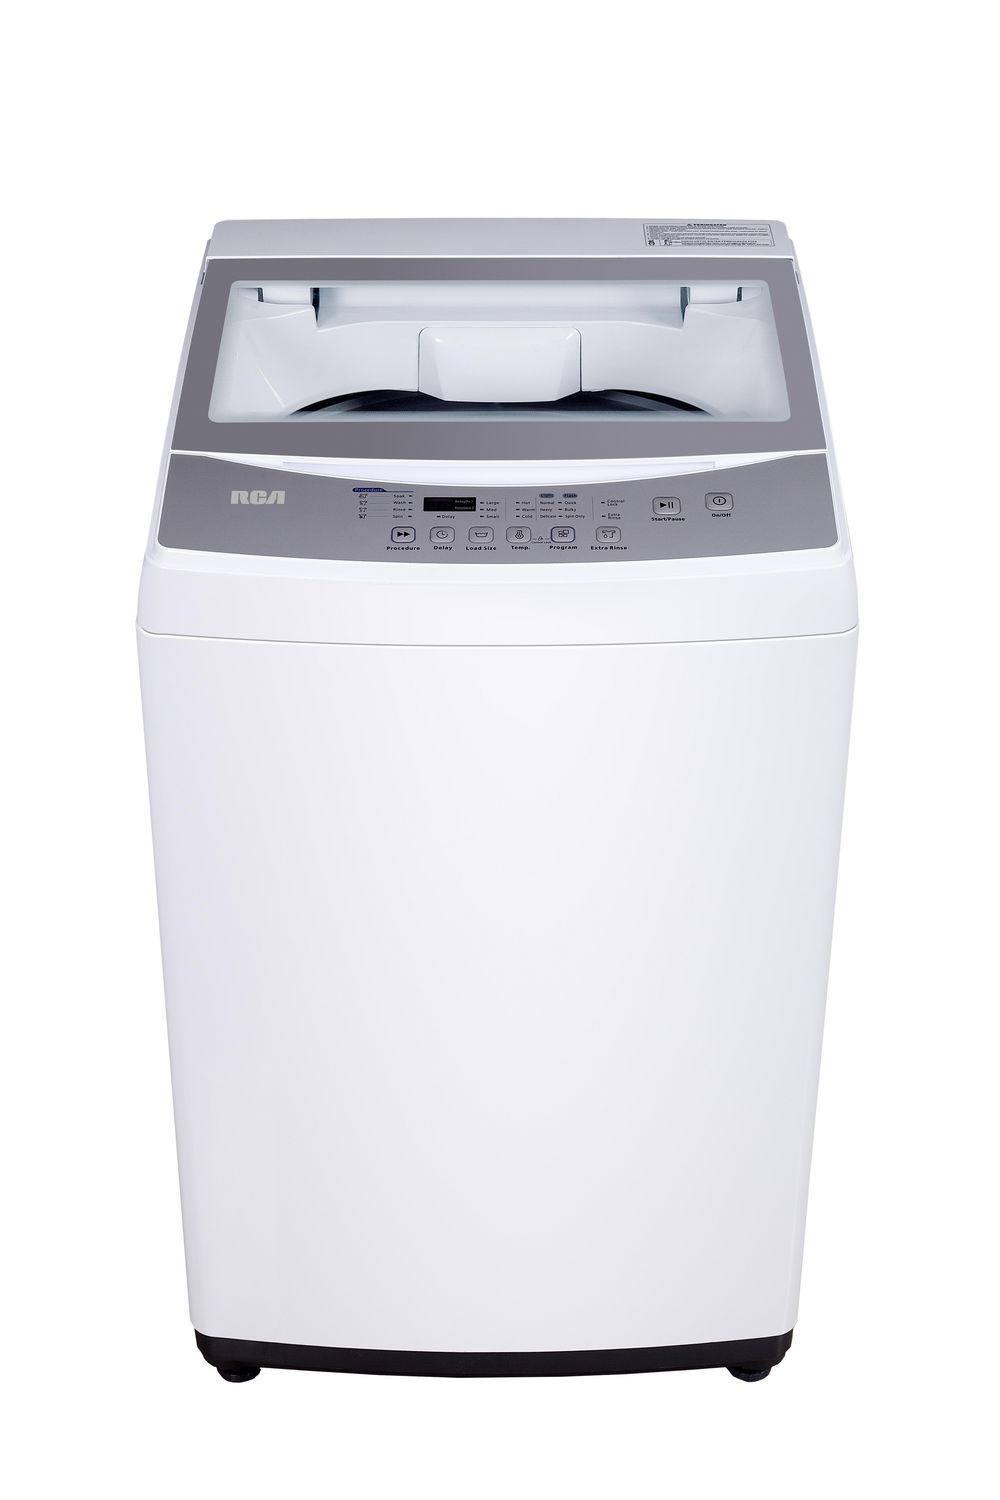 RCA 2.1 Cu Ft Portable Washer, White 